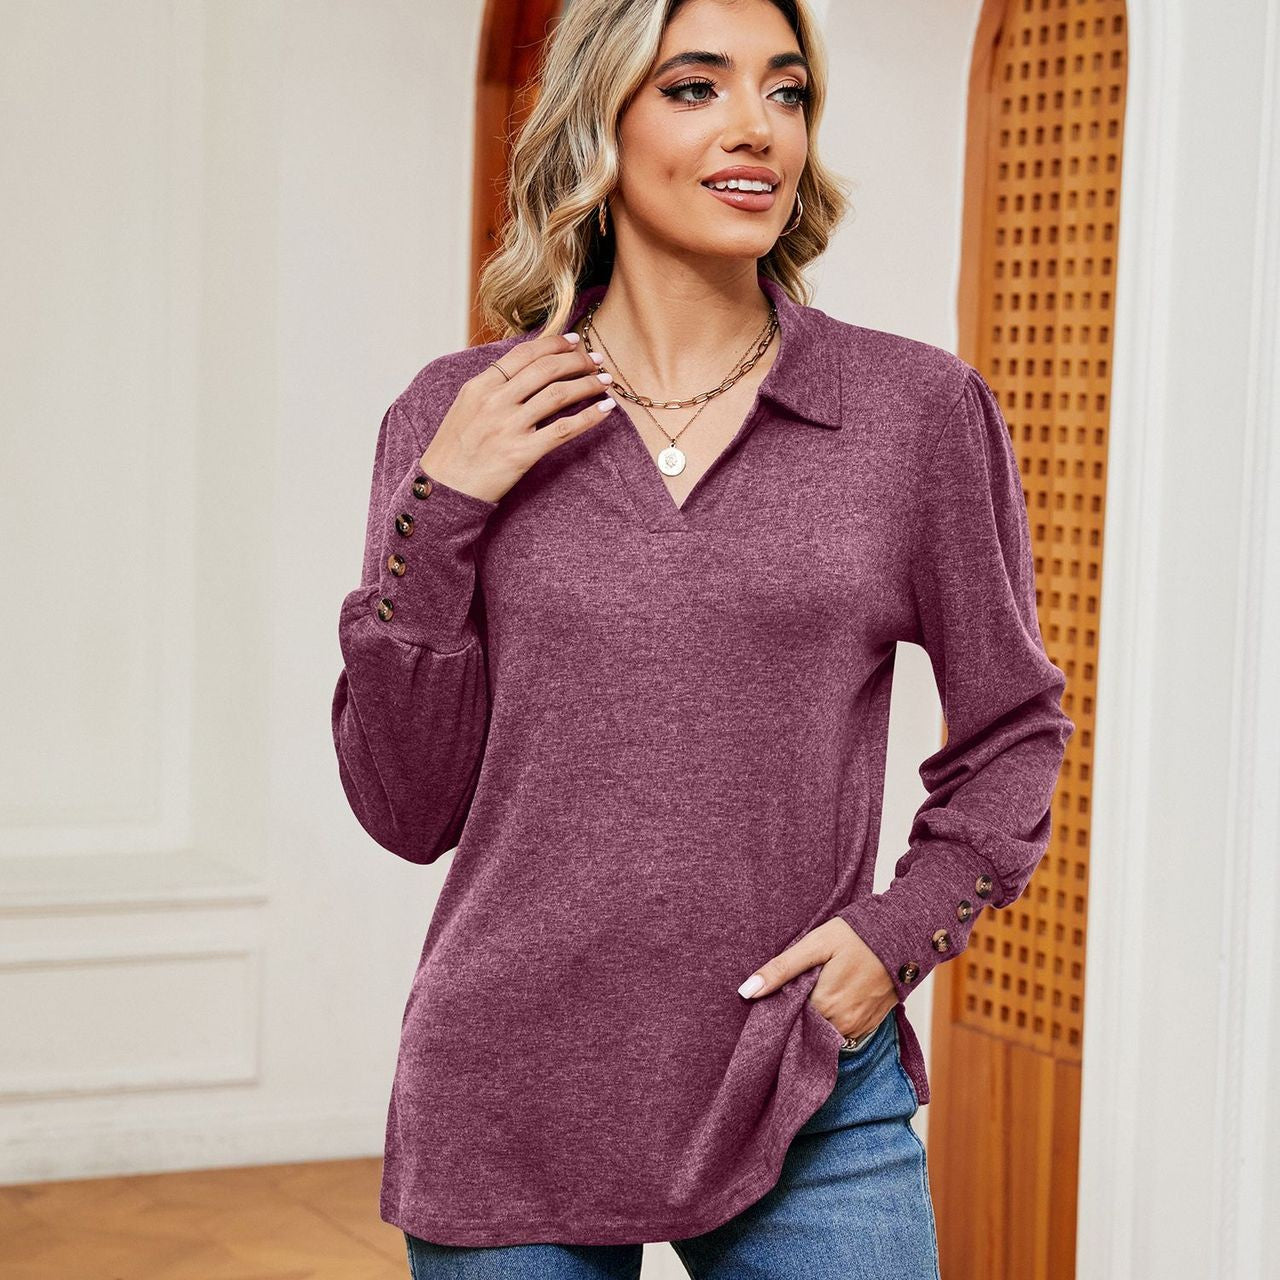 Button Loose-fitting Sanding T-shirt Top For Women